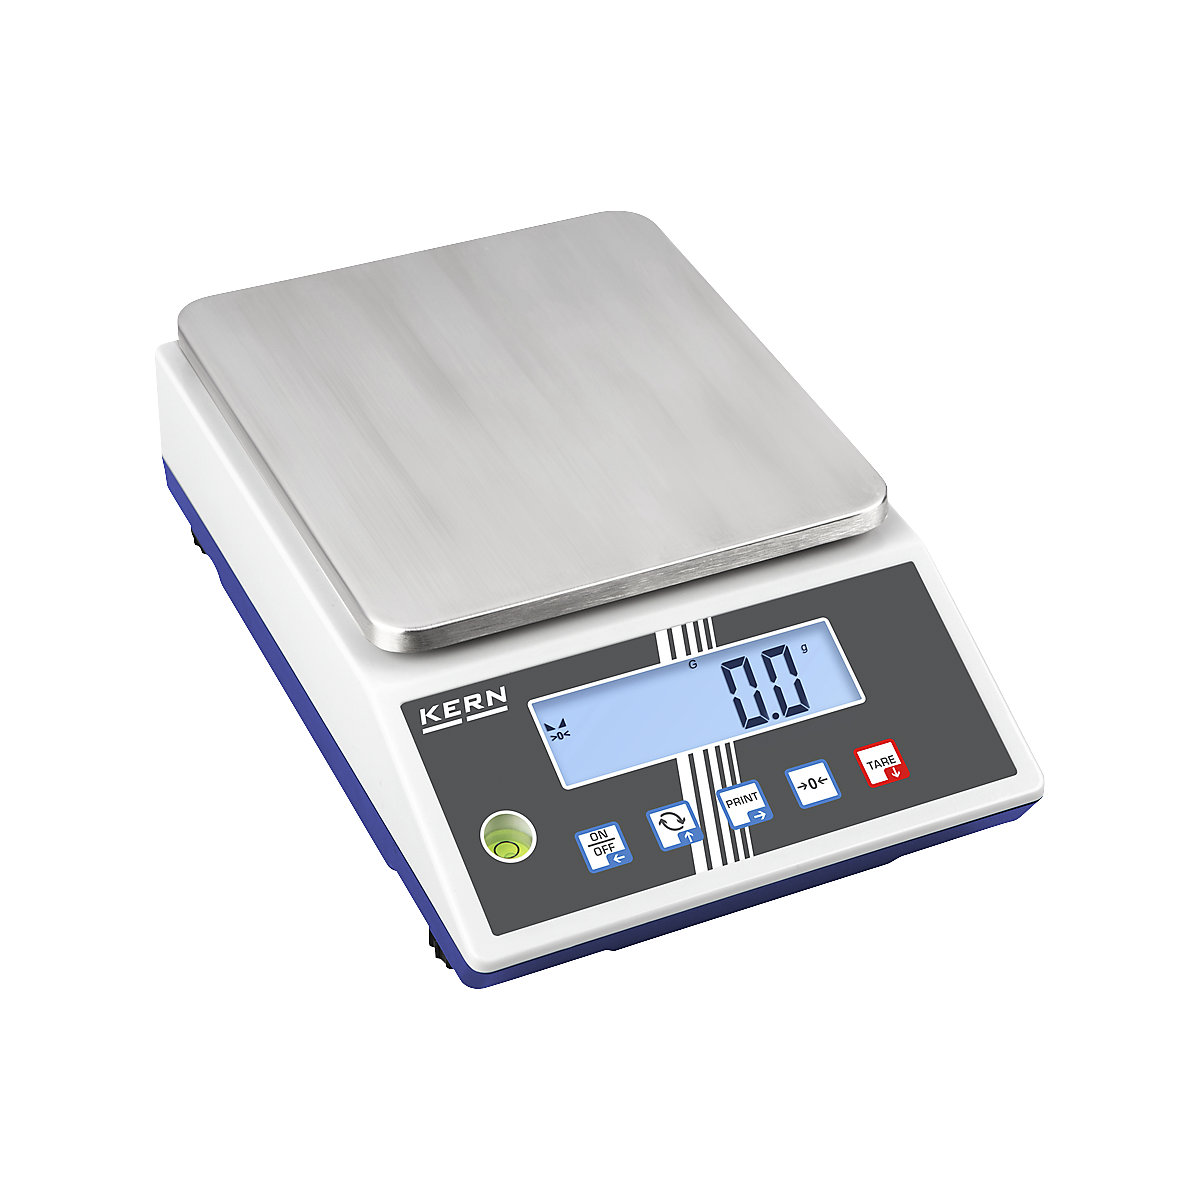 IoT-Line compact laboratory scales, weighing plate 150 x 170 mm, weighing range up to 10 kg, read-out accuracy 0.1 g-2